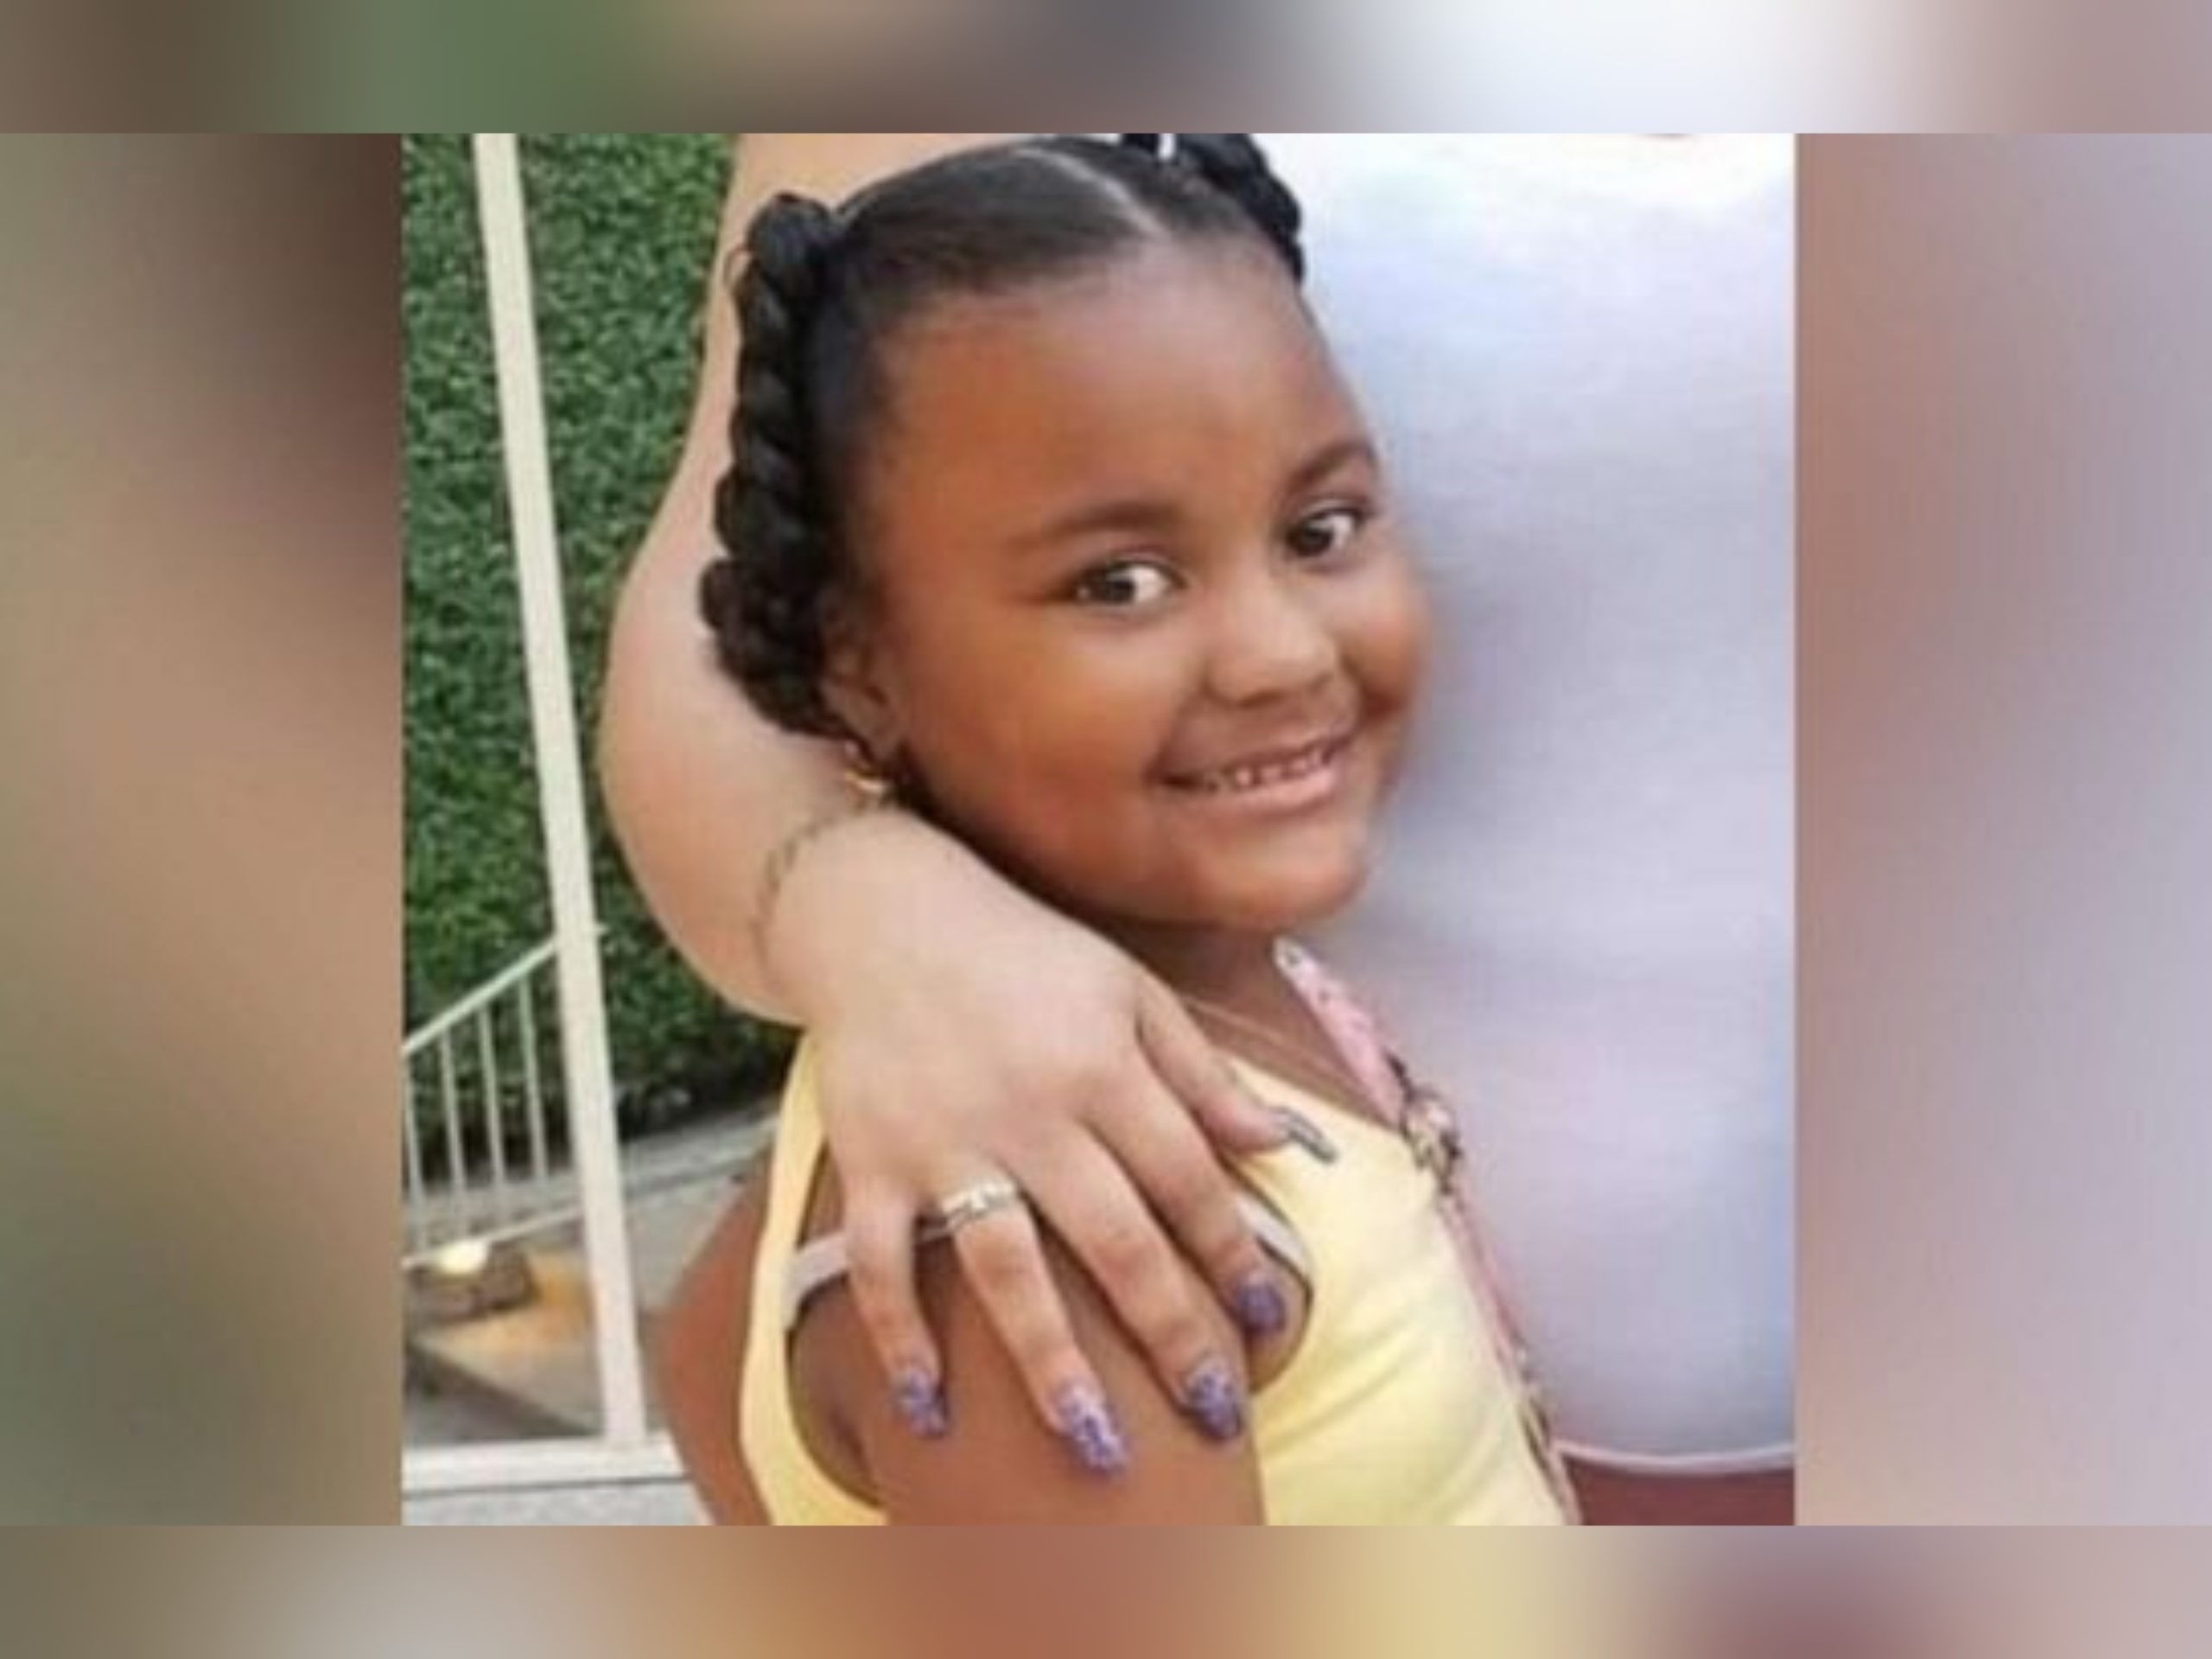 9-Year Old Girl In Medically Induced Coma After Road Rage Shooting